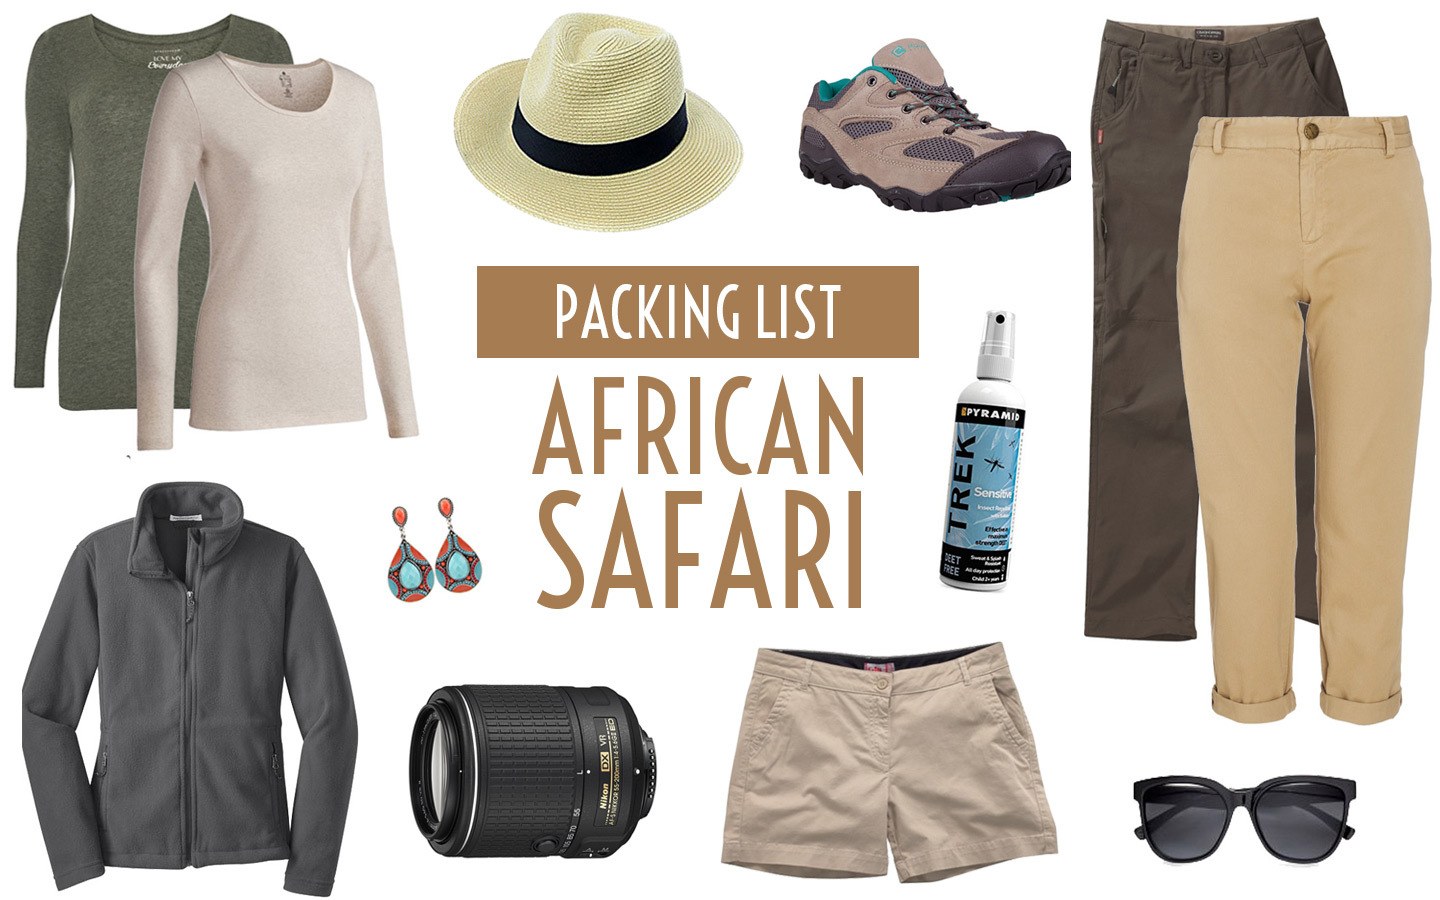 Travel packing list: What to pack for an African safari